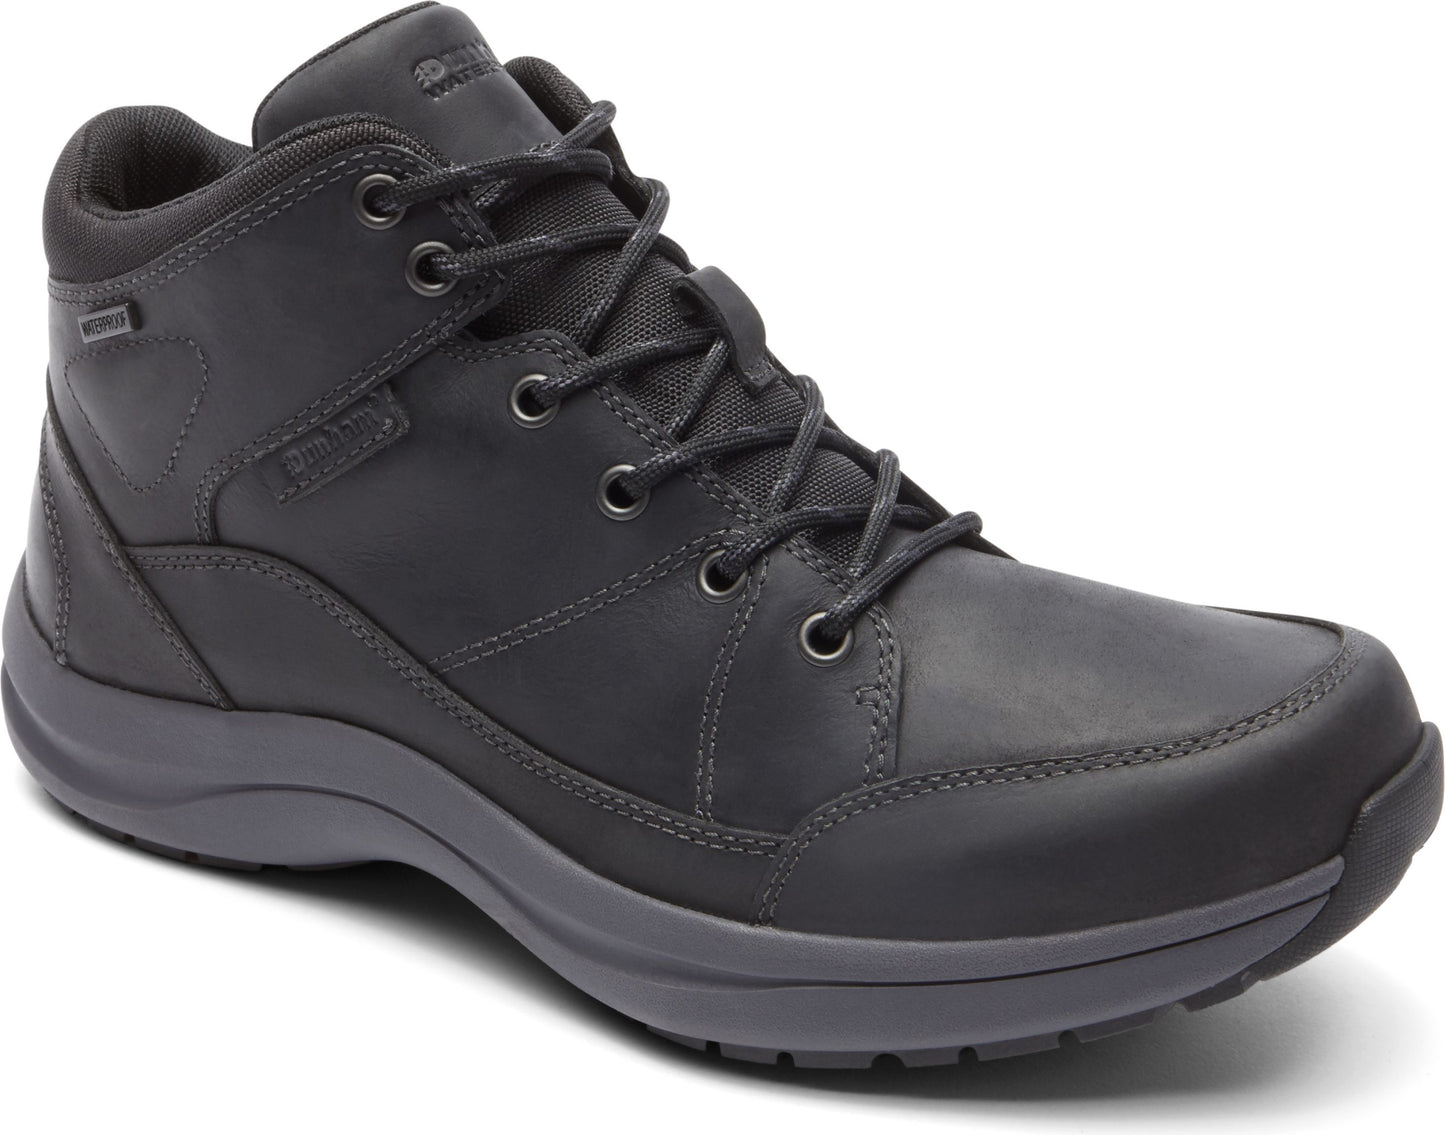 Dunhan Boots Sutton Simon Lace Up Black - Extra Wide